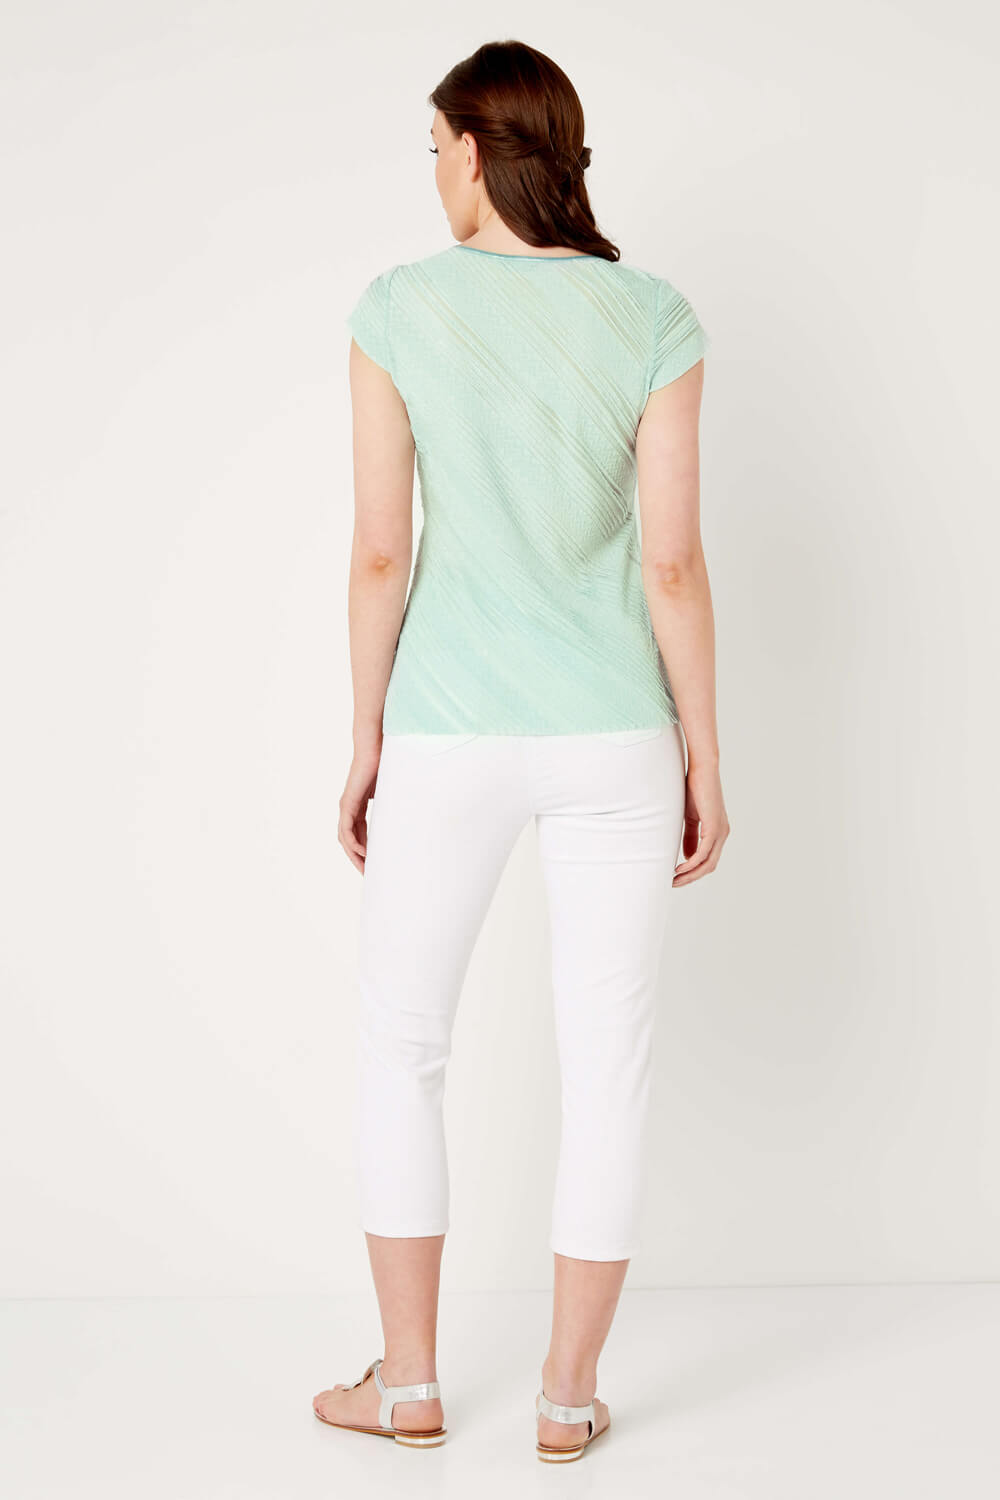 Mint Frill Jersey Top , Image 2 of 4